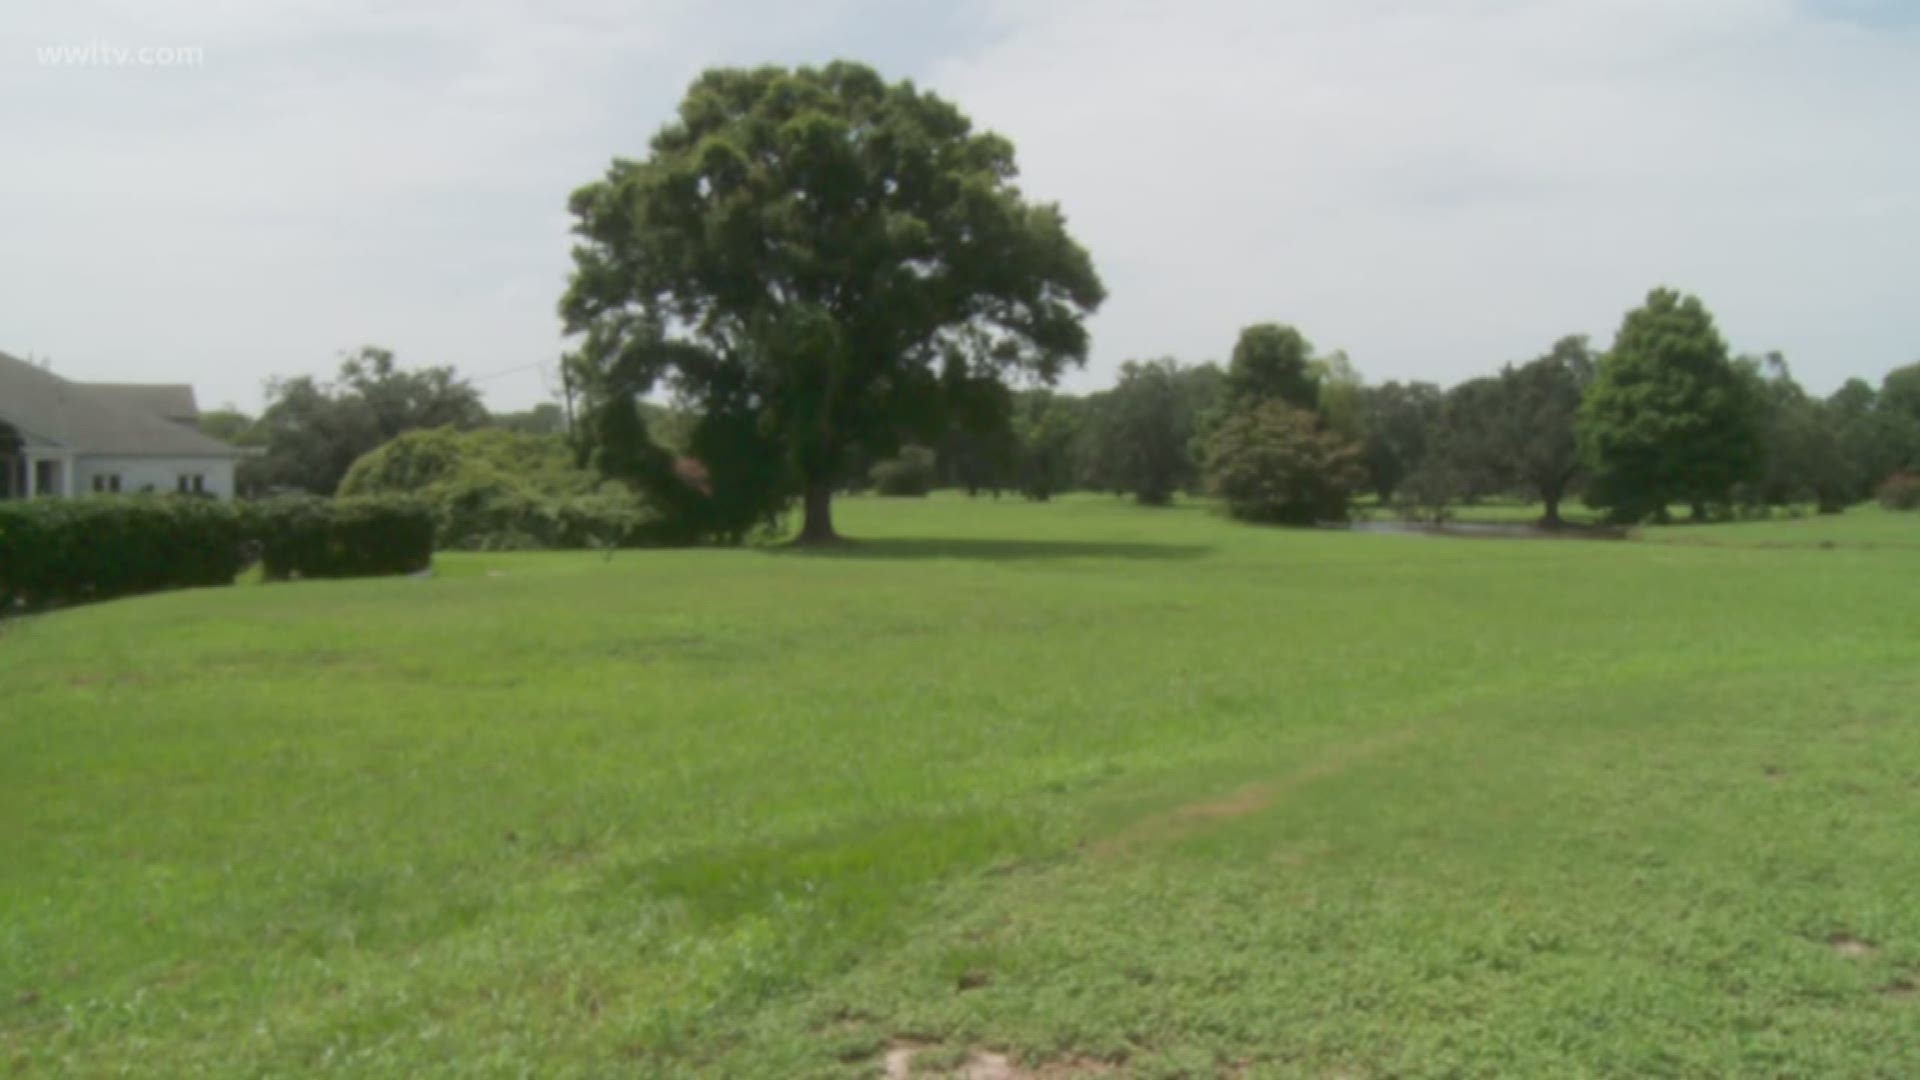 Developers will split up the space with 15 acres going towards commercial use, 15 acres for a retention pond and 58 acres will be leftover to build 76 new homes.